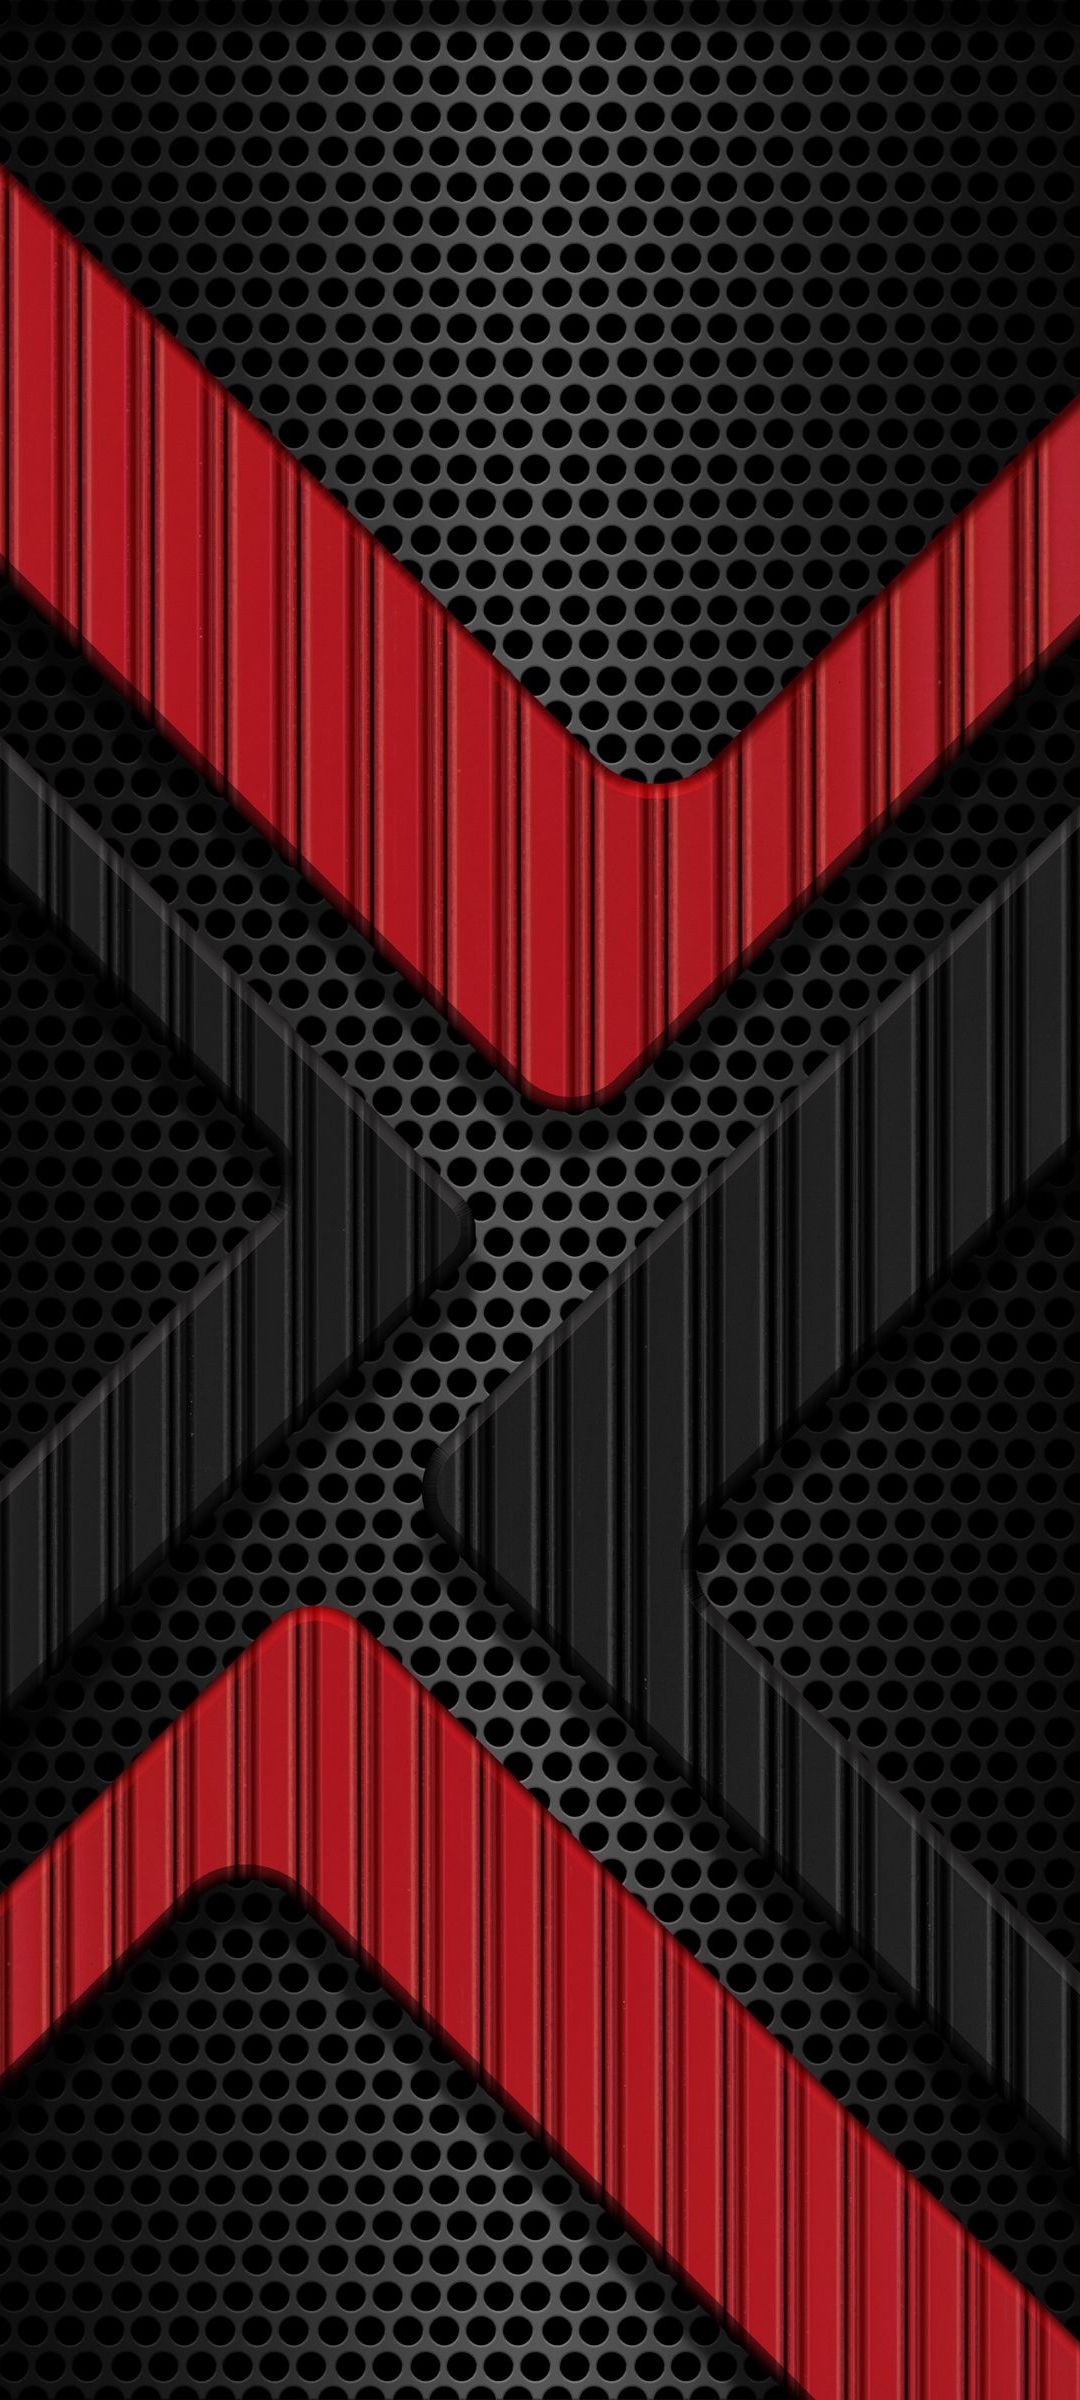 Red and black abstract painting photo – Free Wallpaper Image on Unsplash